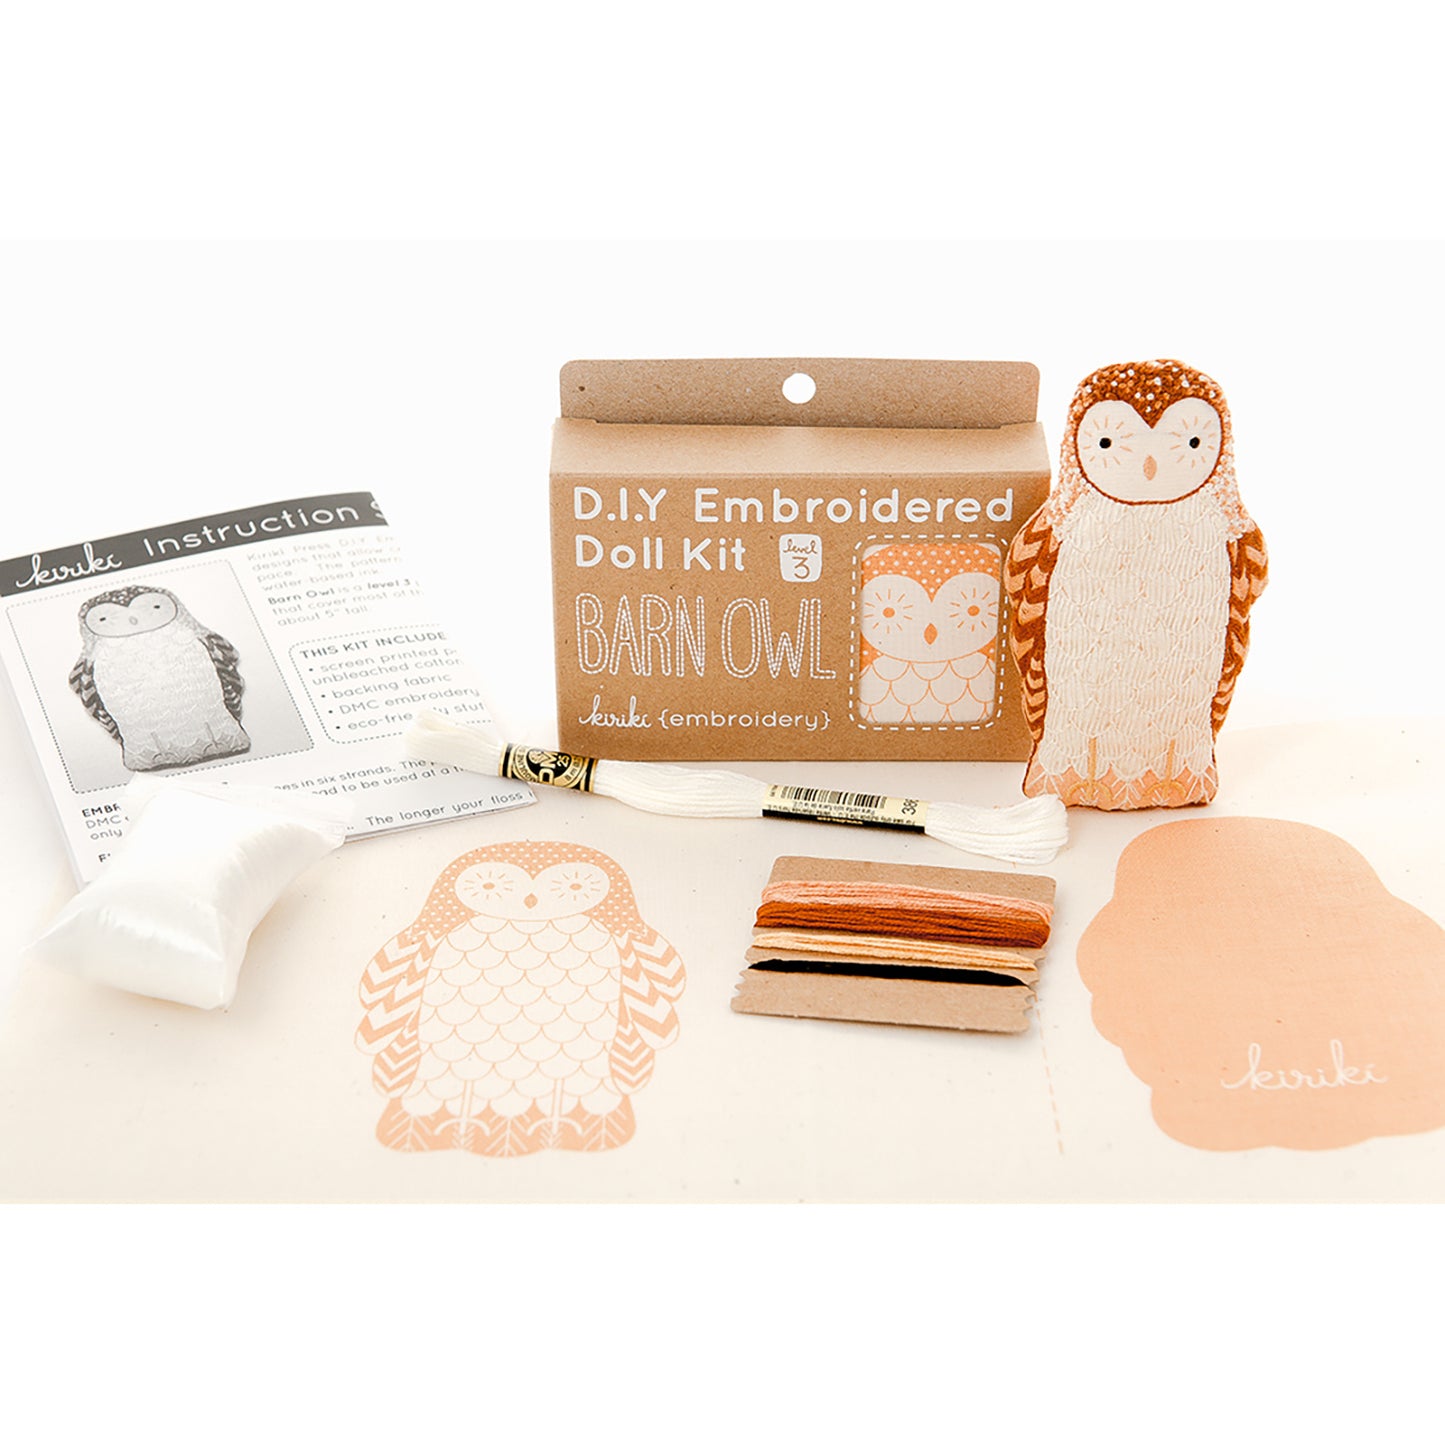 D.I.Y. Embroidered Doll Kit - Barn Owl Alternative View #2